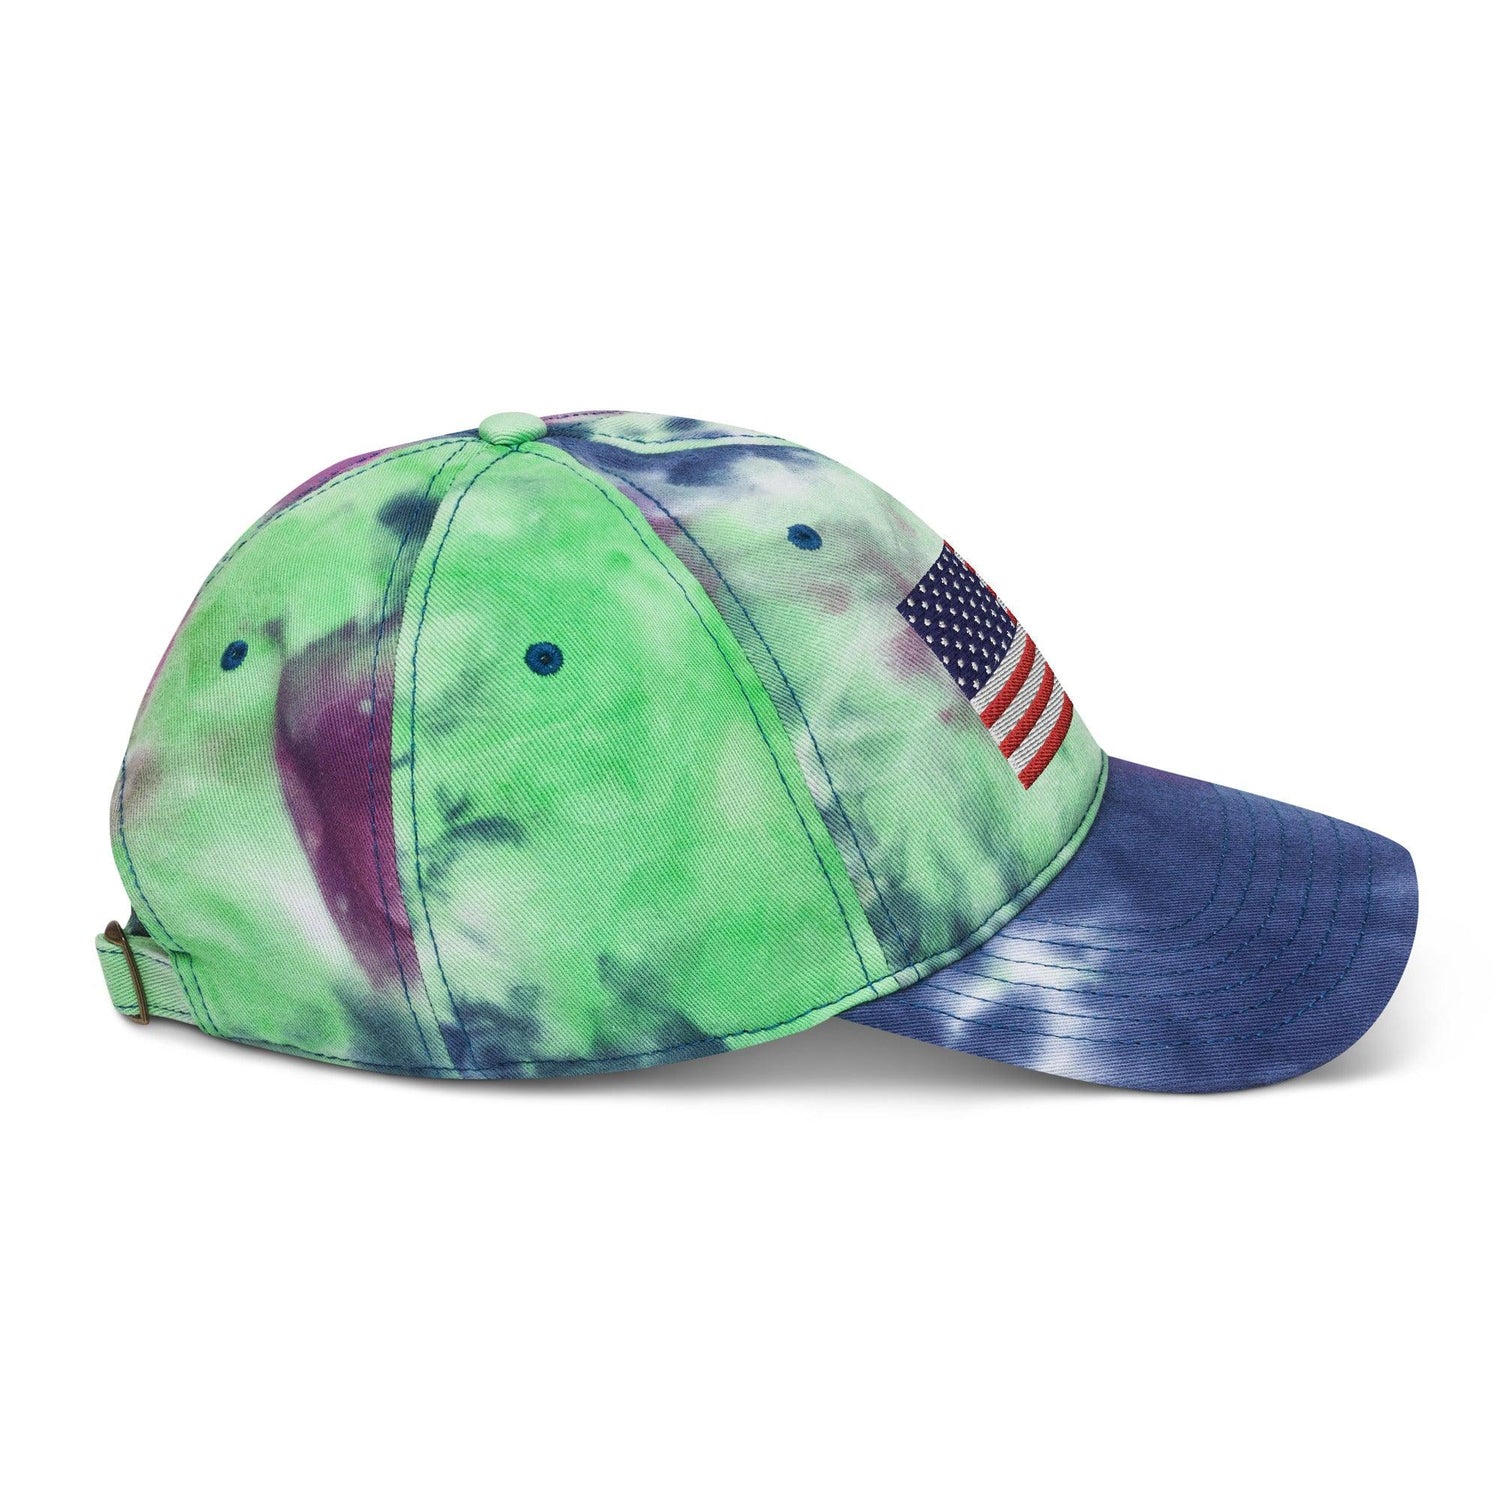 Embroidery American Flag Tie dye hat